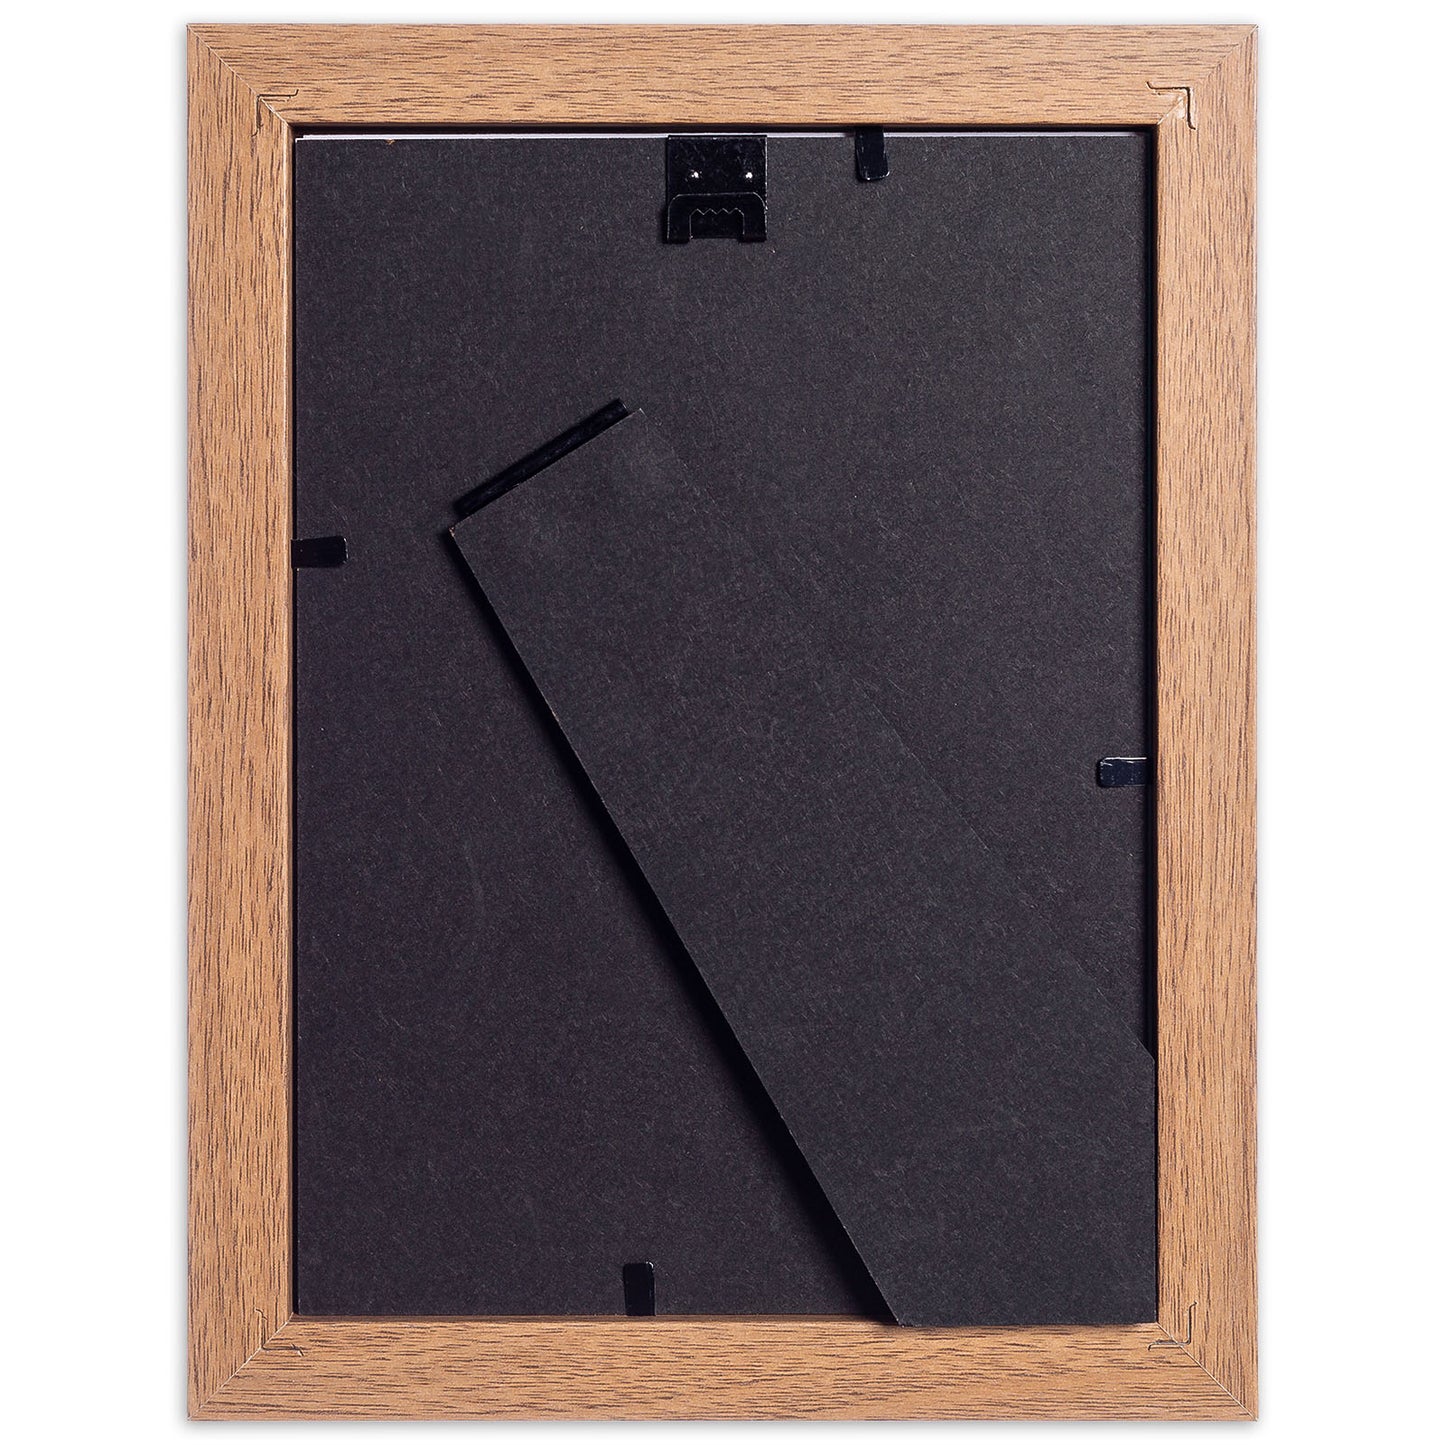 4" x 6” Classic Light Oak MDF Wood Picture Frame with Tempered Glass